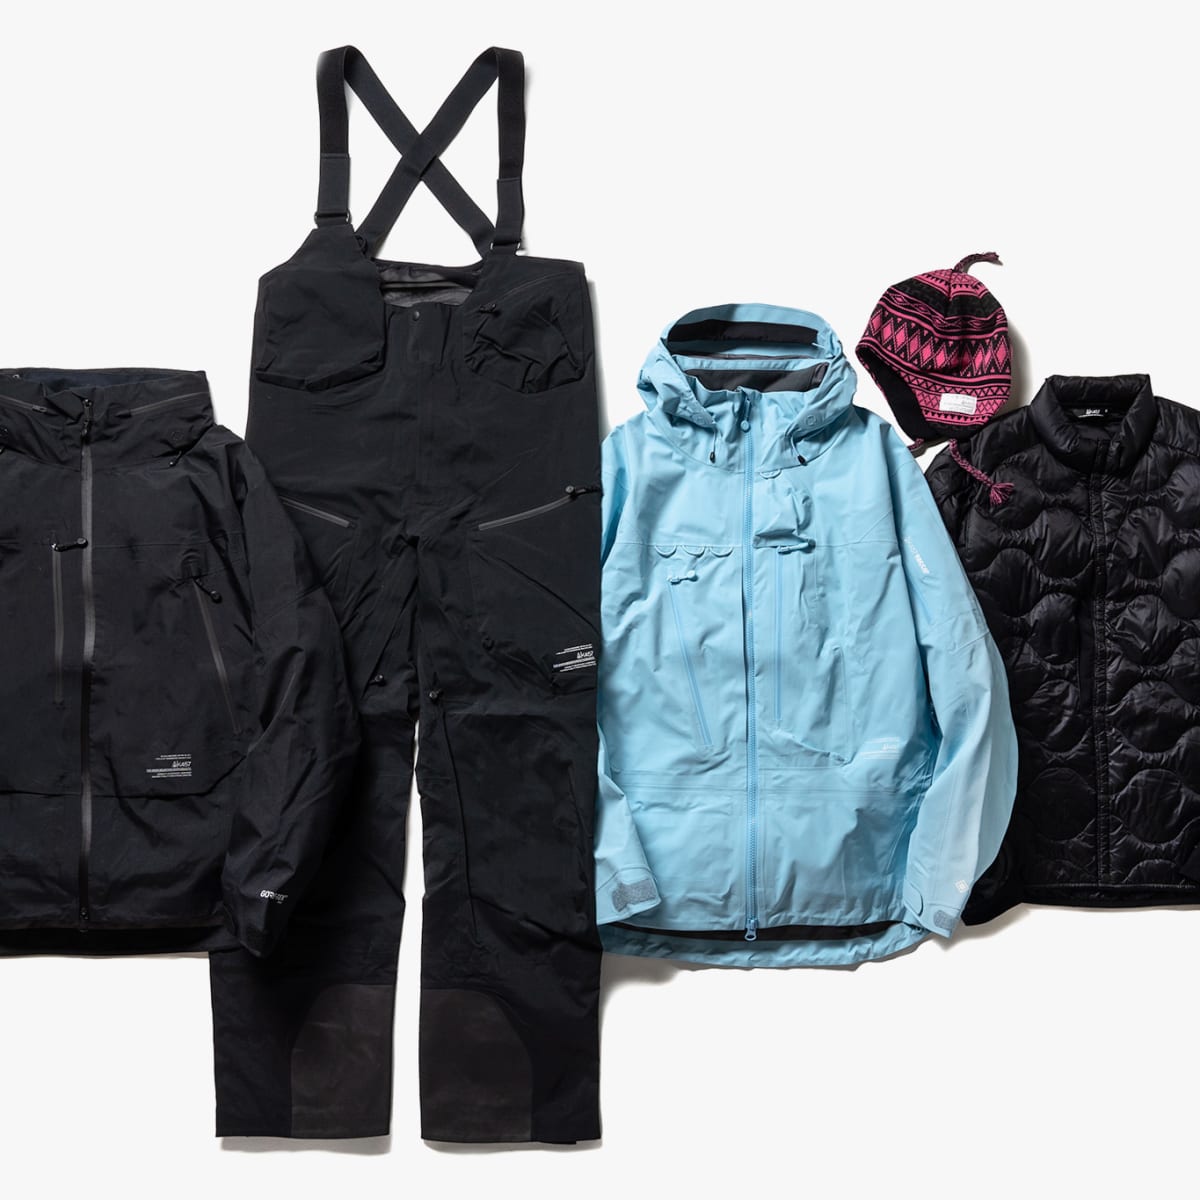 Burton Japan outfits their new AK collection with Gore Tex Pro